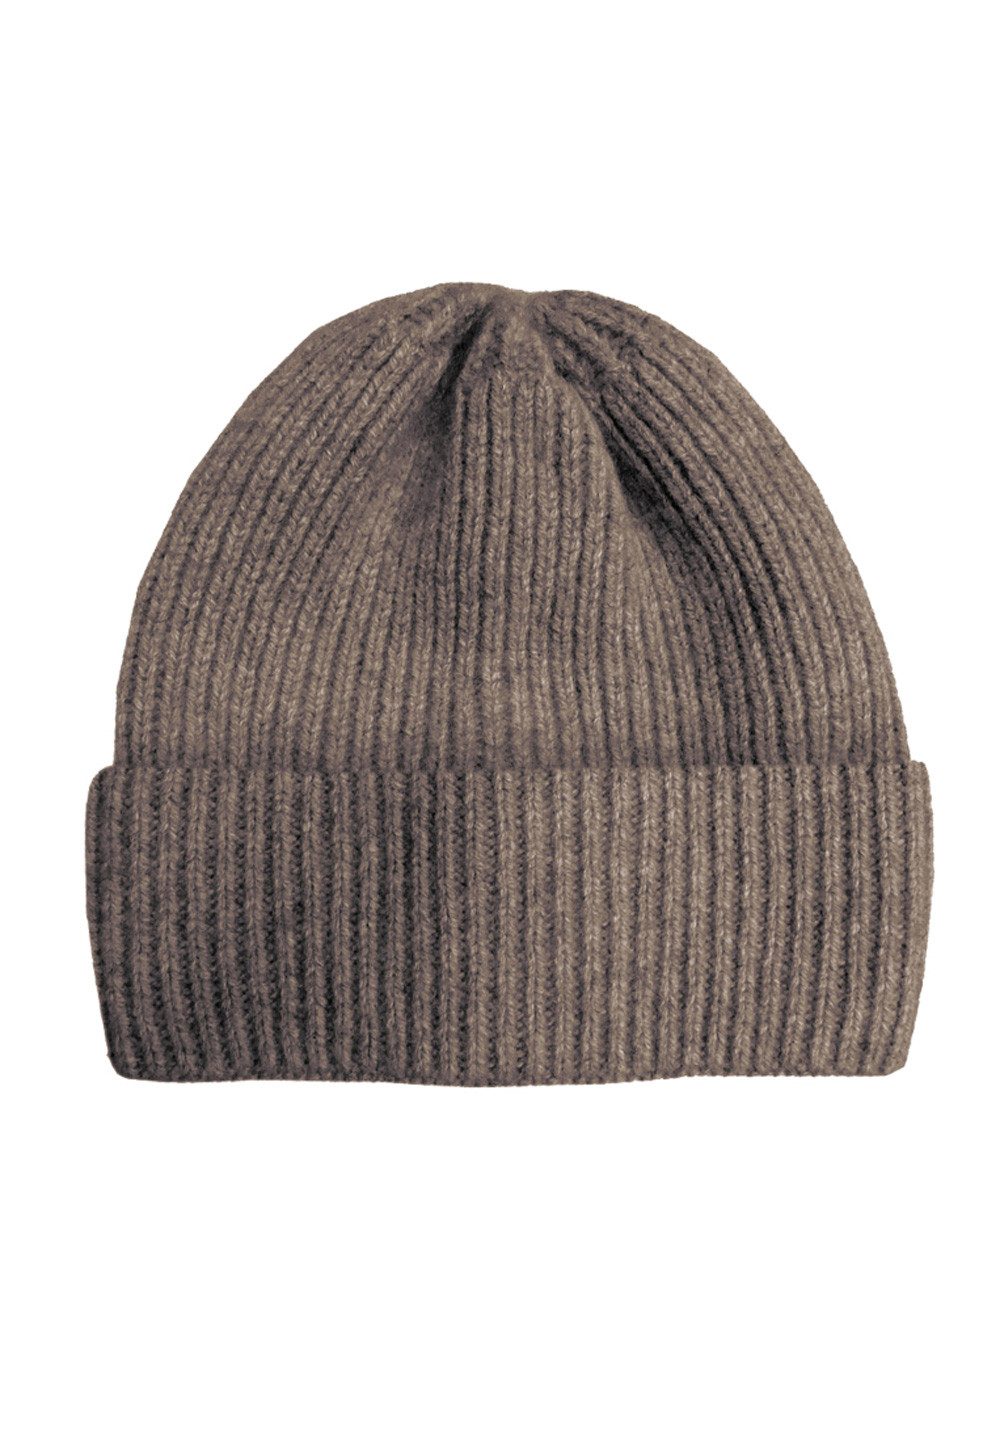 Europe taupe Strickmütze Kaschmi knitted CAPO-DOUX up CAPO Made CAP in ribbed, turn cap,